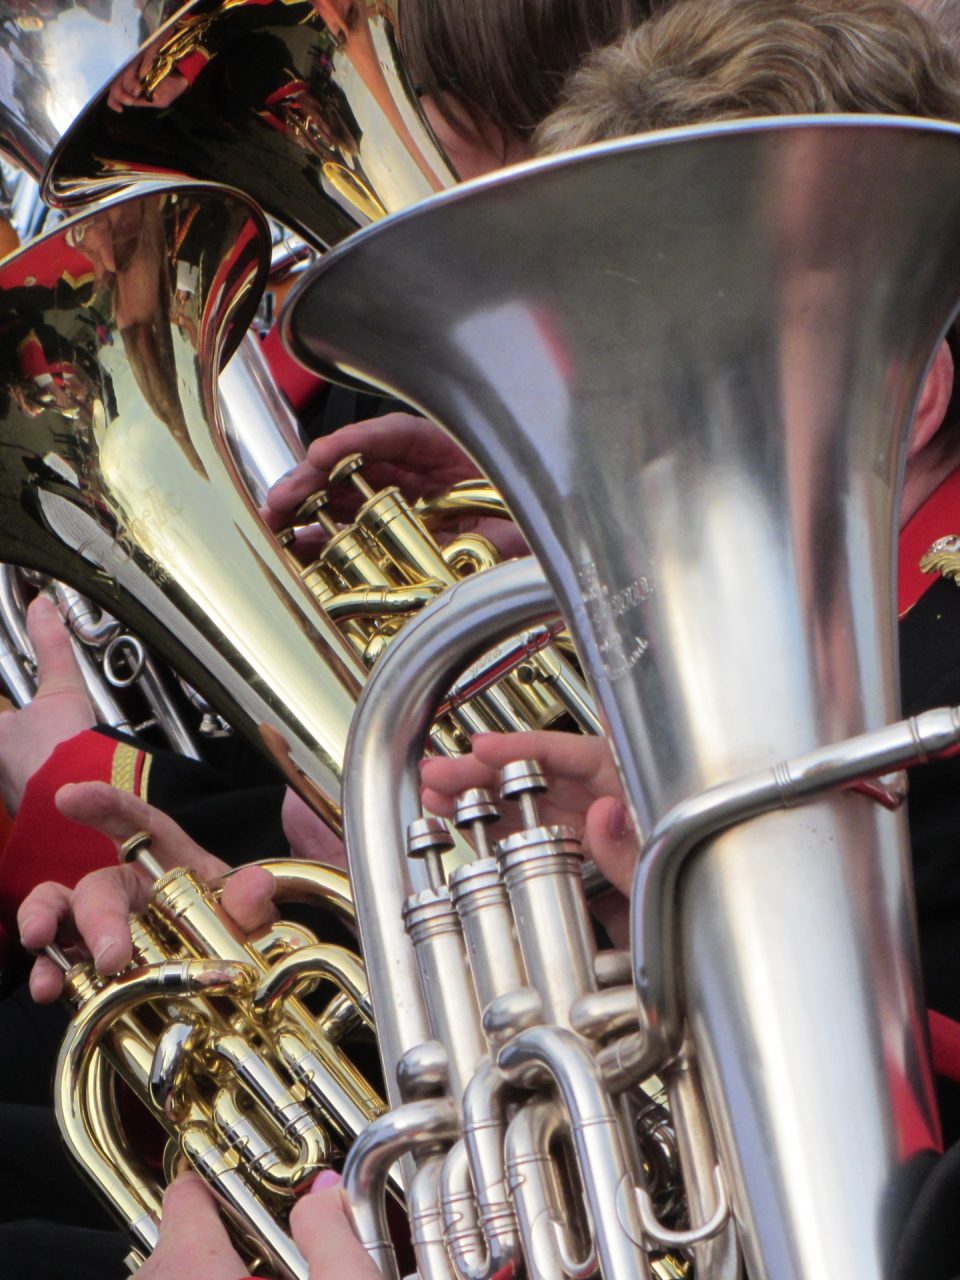 Euphonium and Baritone Horn being played